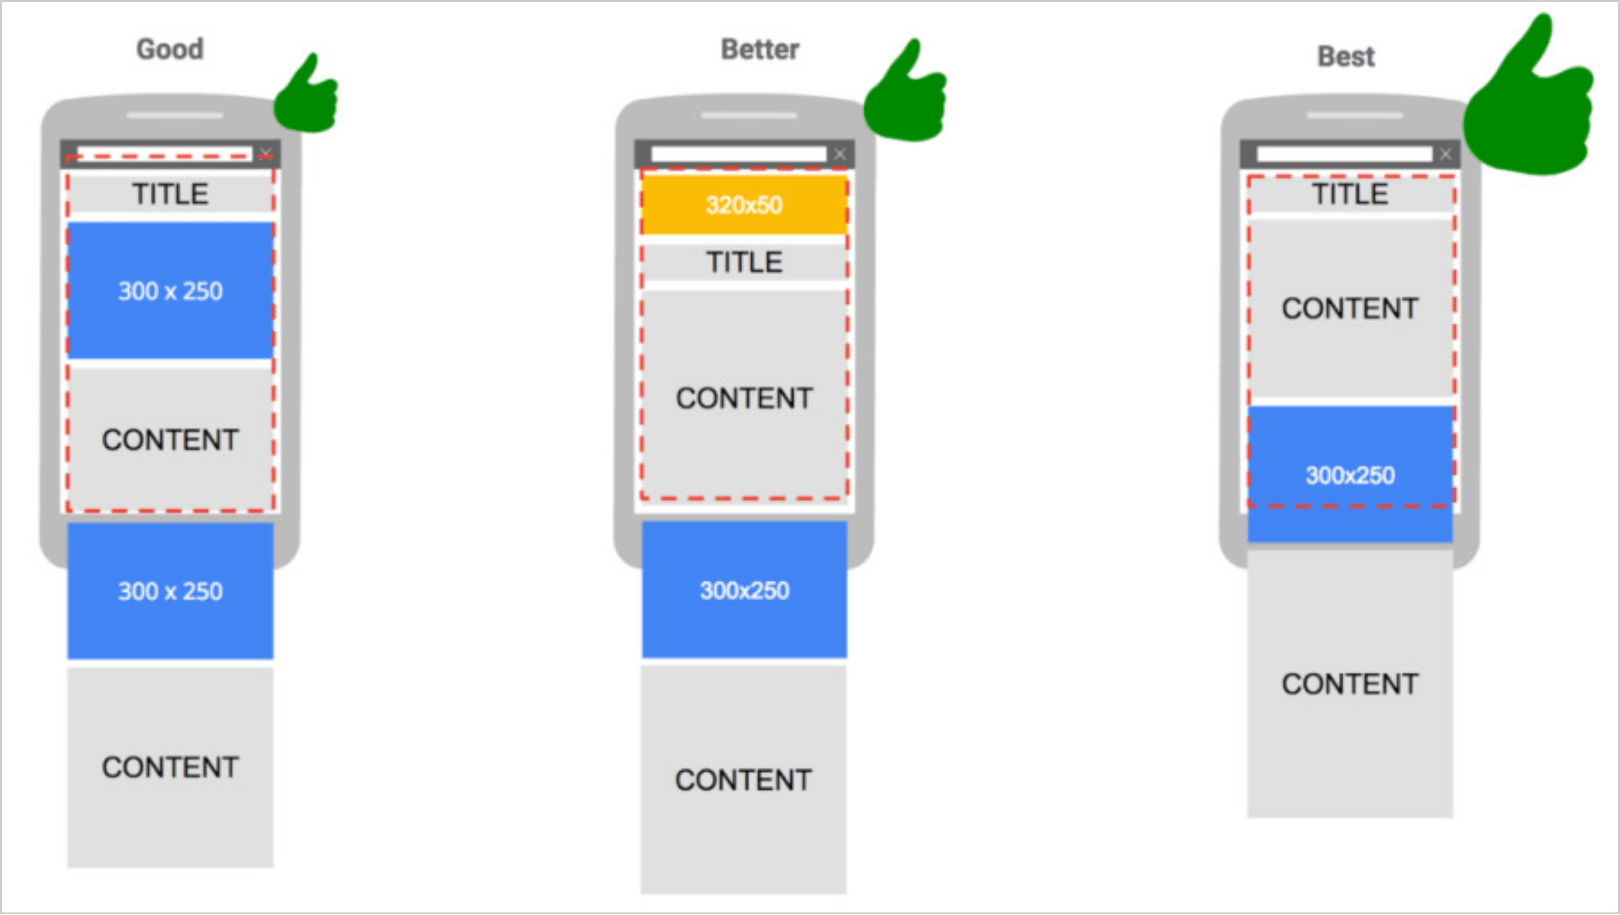 Banner ad sizes for mobile that are recommended by Google